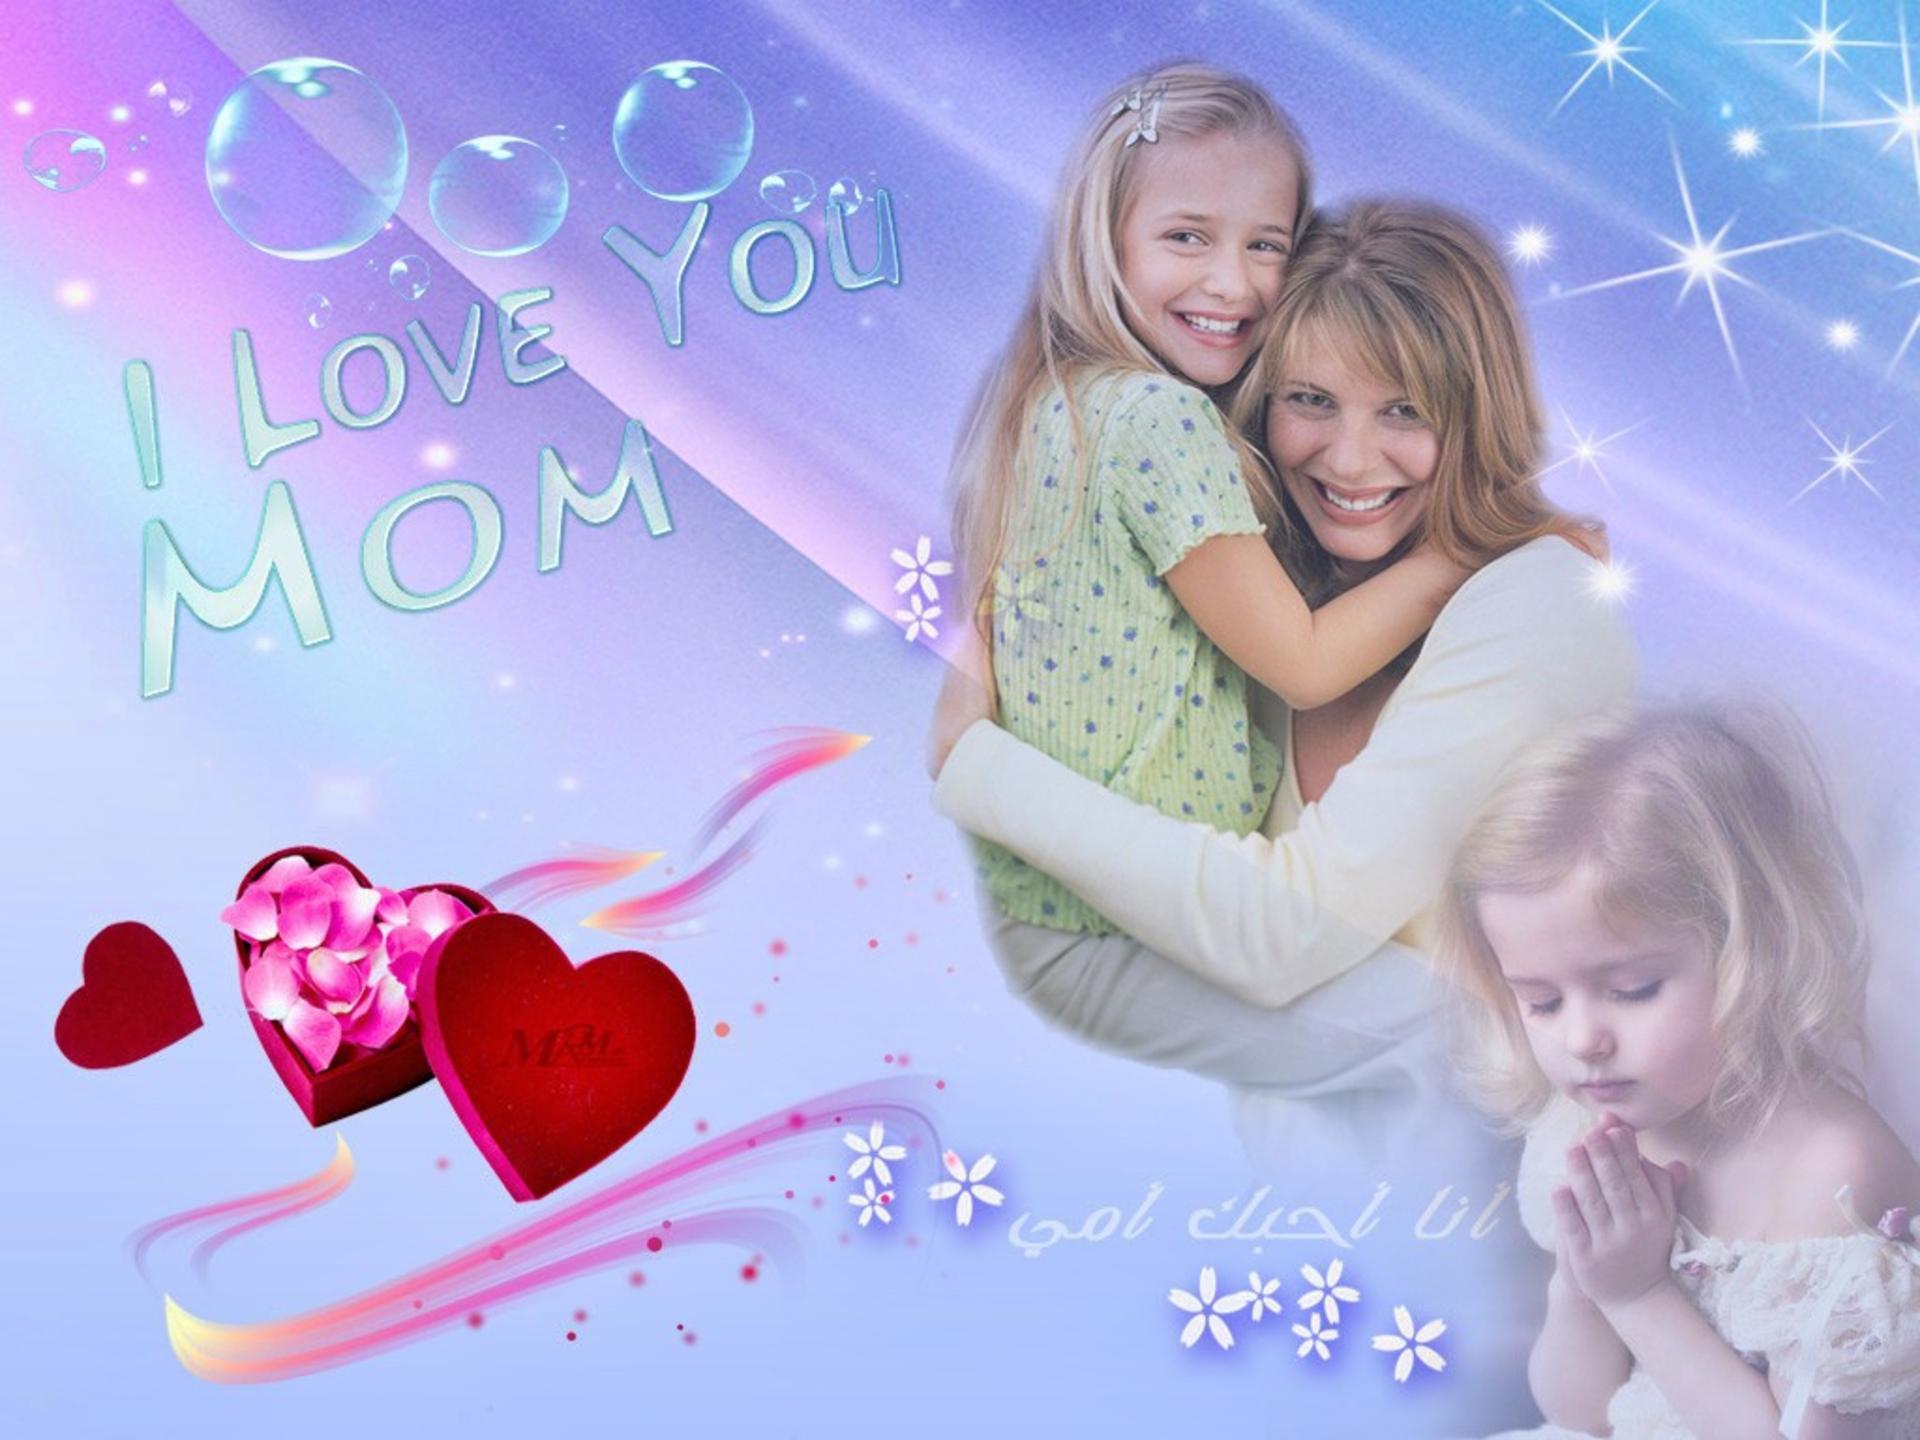 I Love You Mom And Dad Wallpaper, Picture